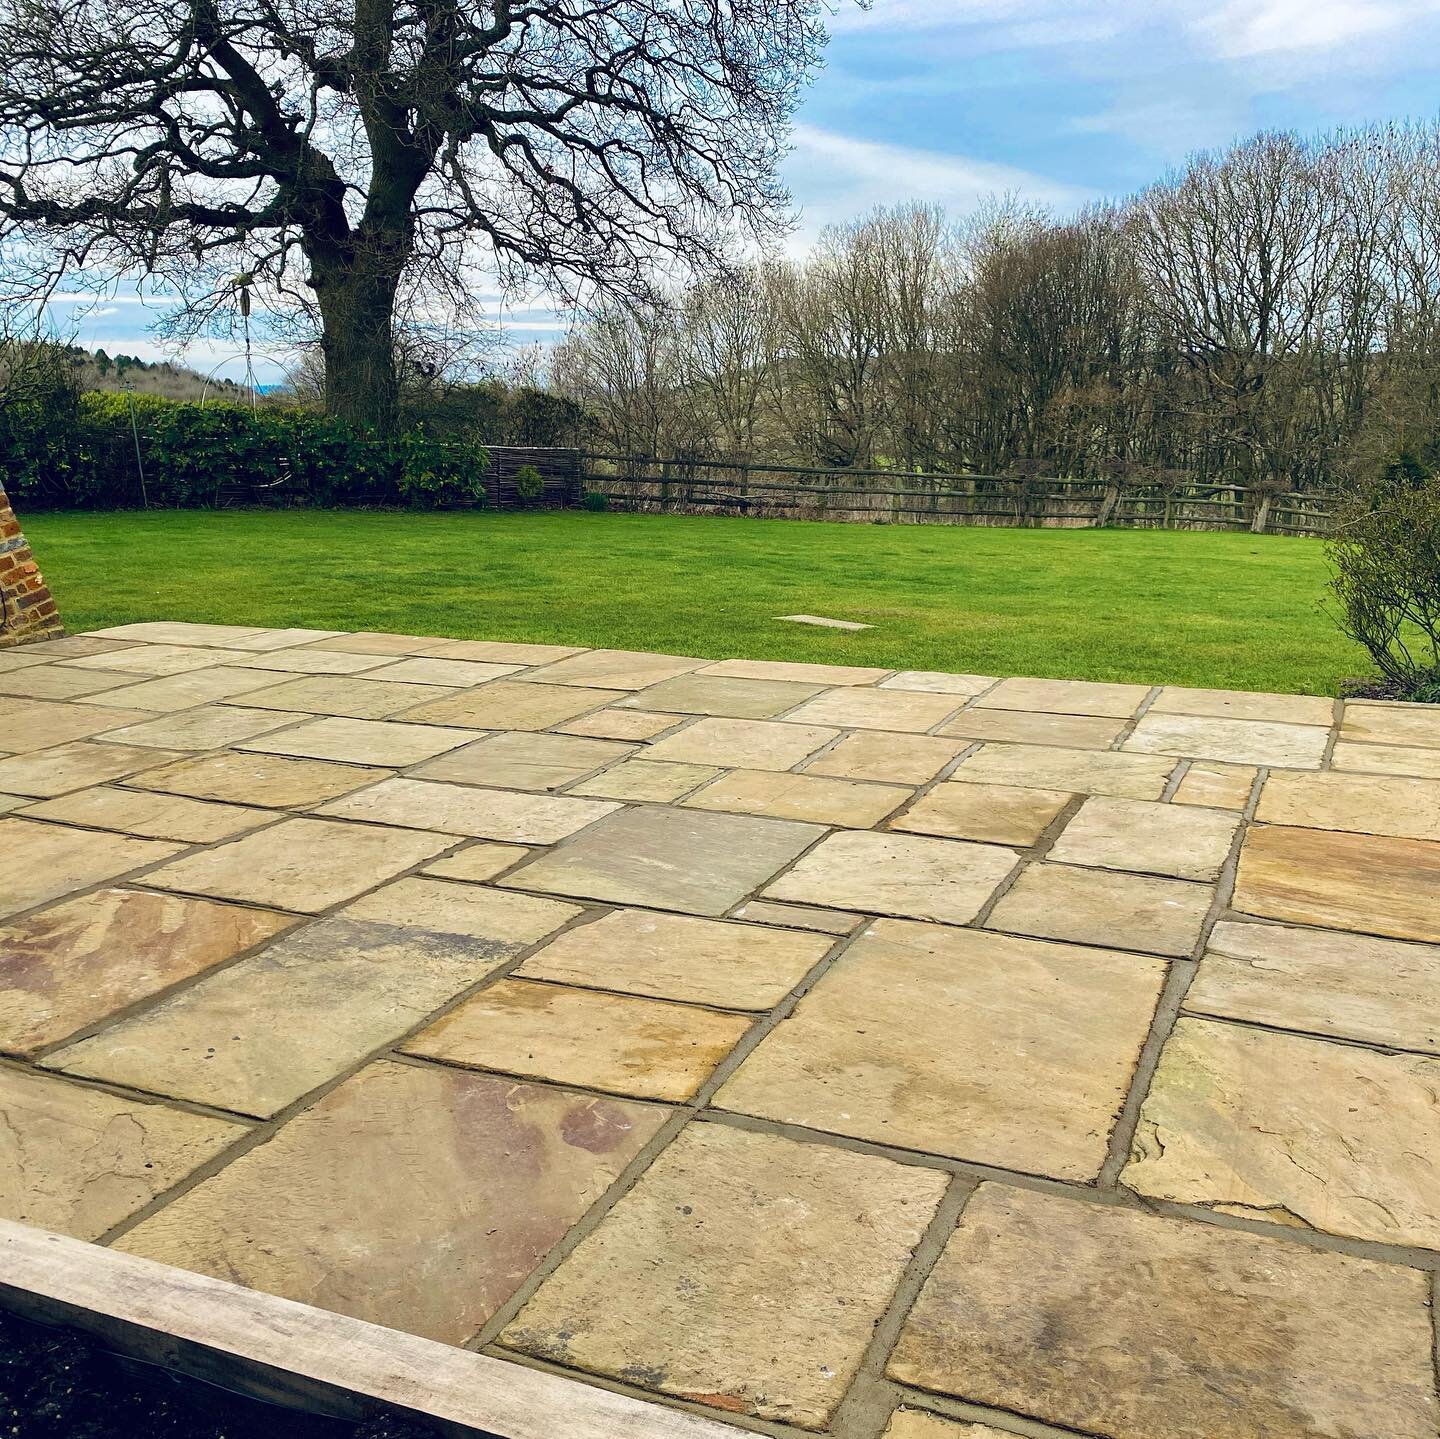 Loved using these reclaimed Yorkstone pavers. They bring a instant aged feel and build character to your project.